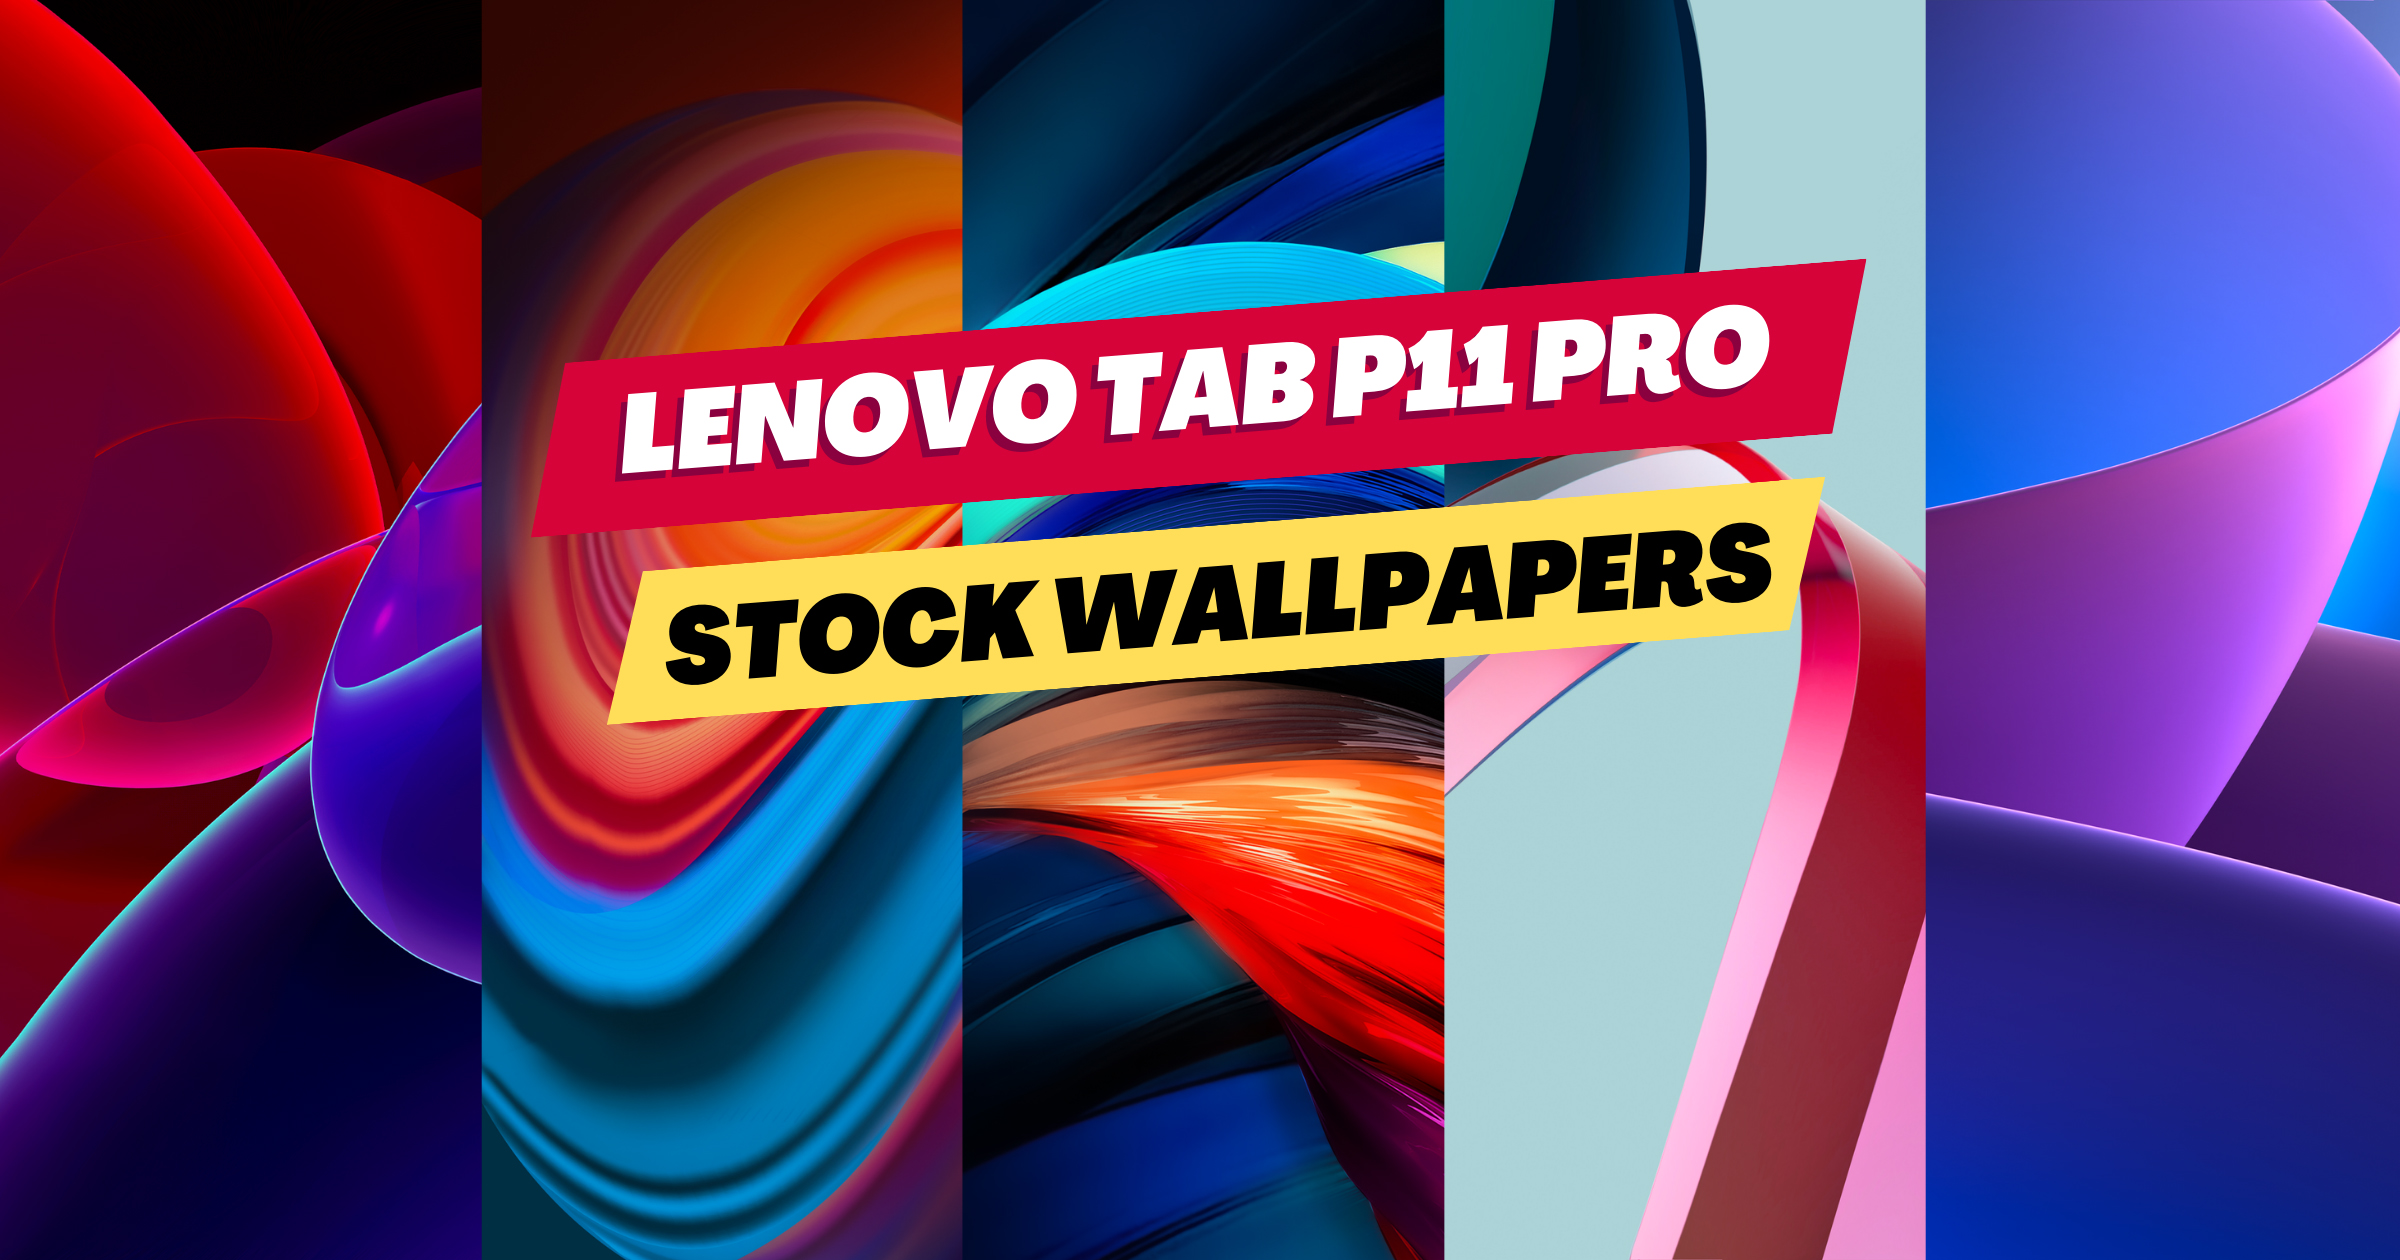 Download Lenovo Tab P11 Pro (2nd Gen) wallpapers [FHD]